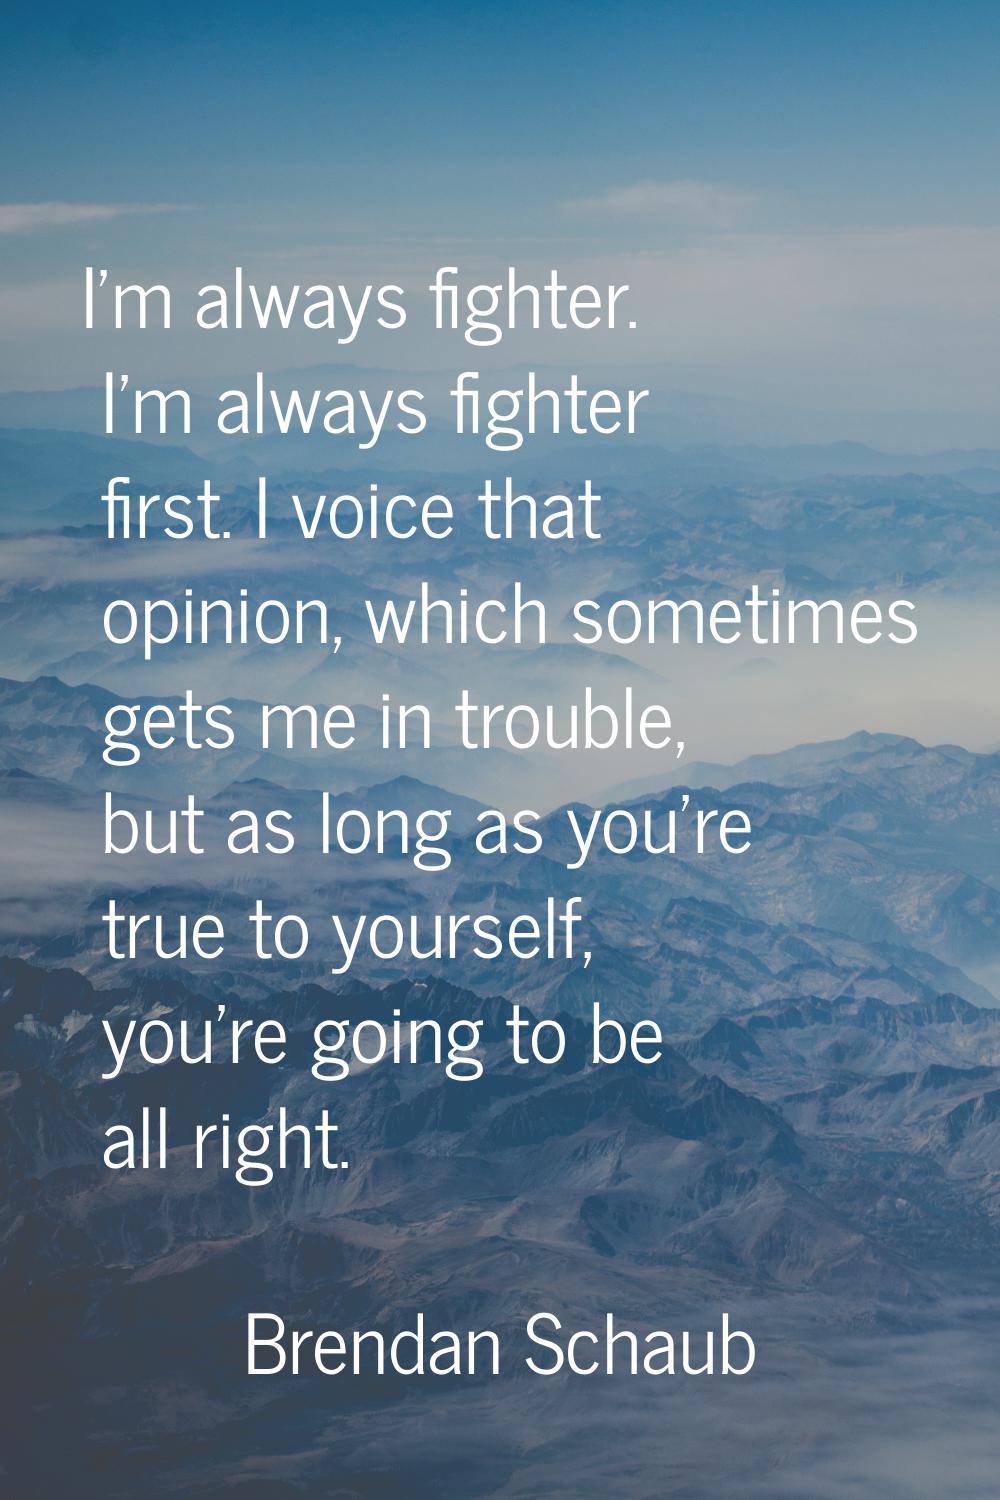 I'm always fighter. I'm always fighter first. I voice that opinion, which sometimes gets me in trou